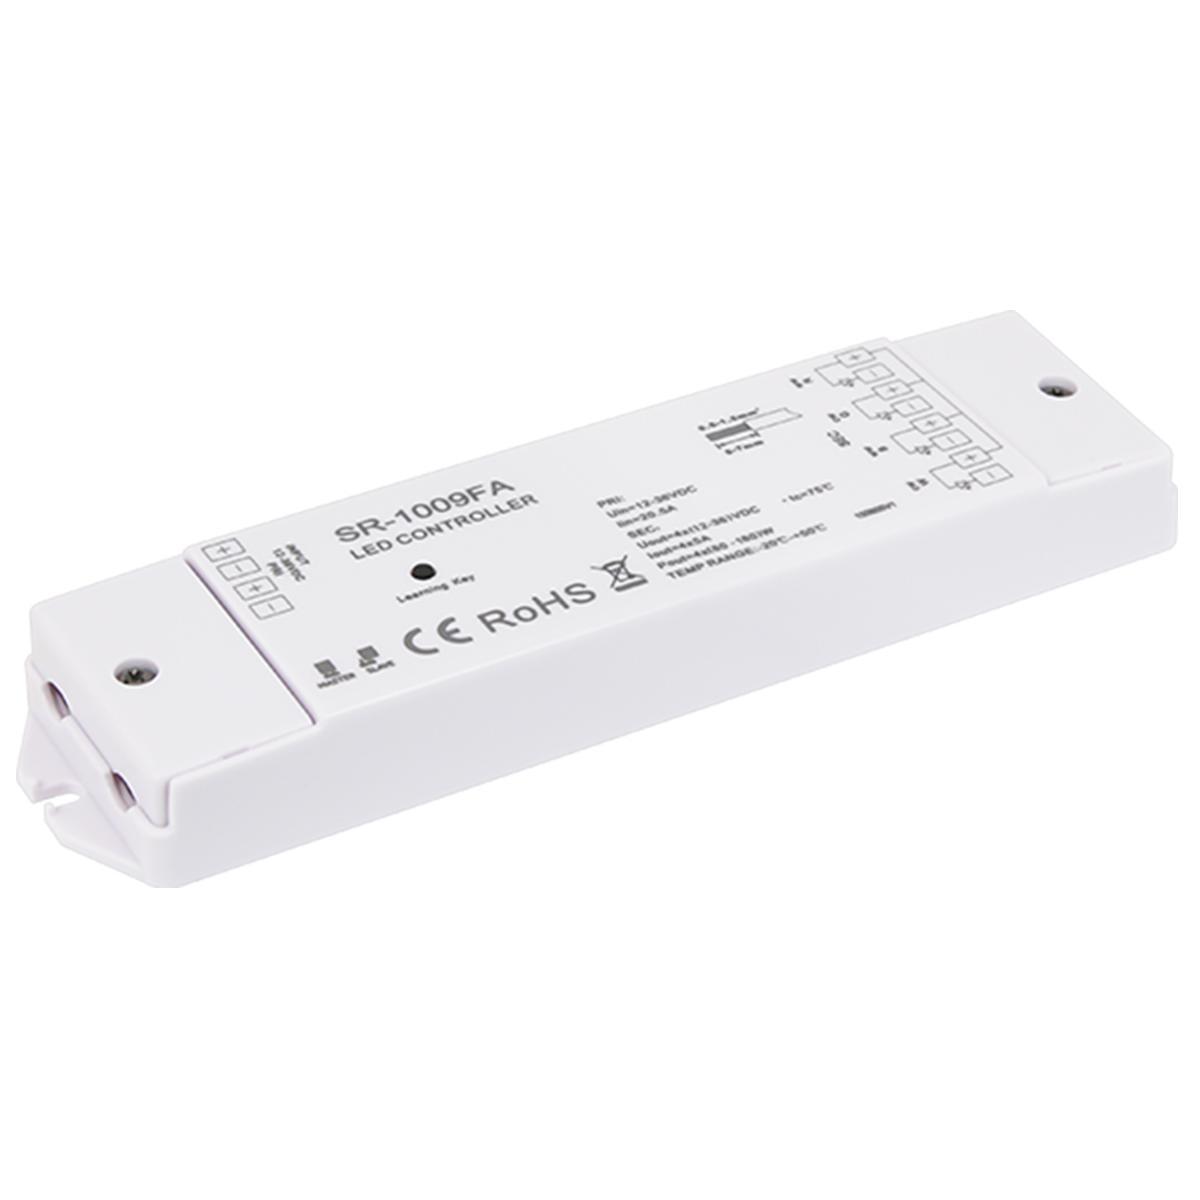 Trulux RF Receiver, 4 Channels x 5A, 12-36V DC Constant Voltage - Bees Lighting